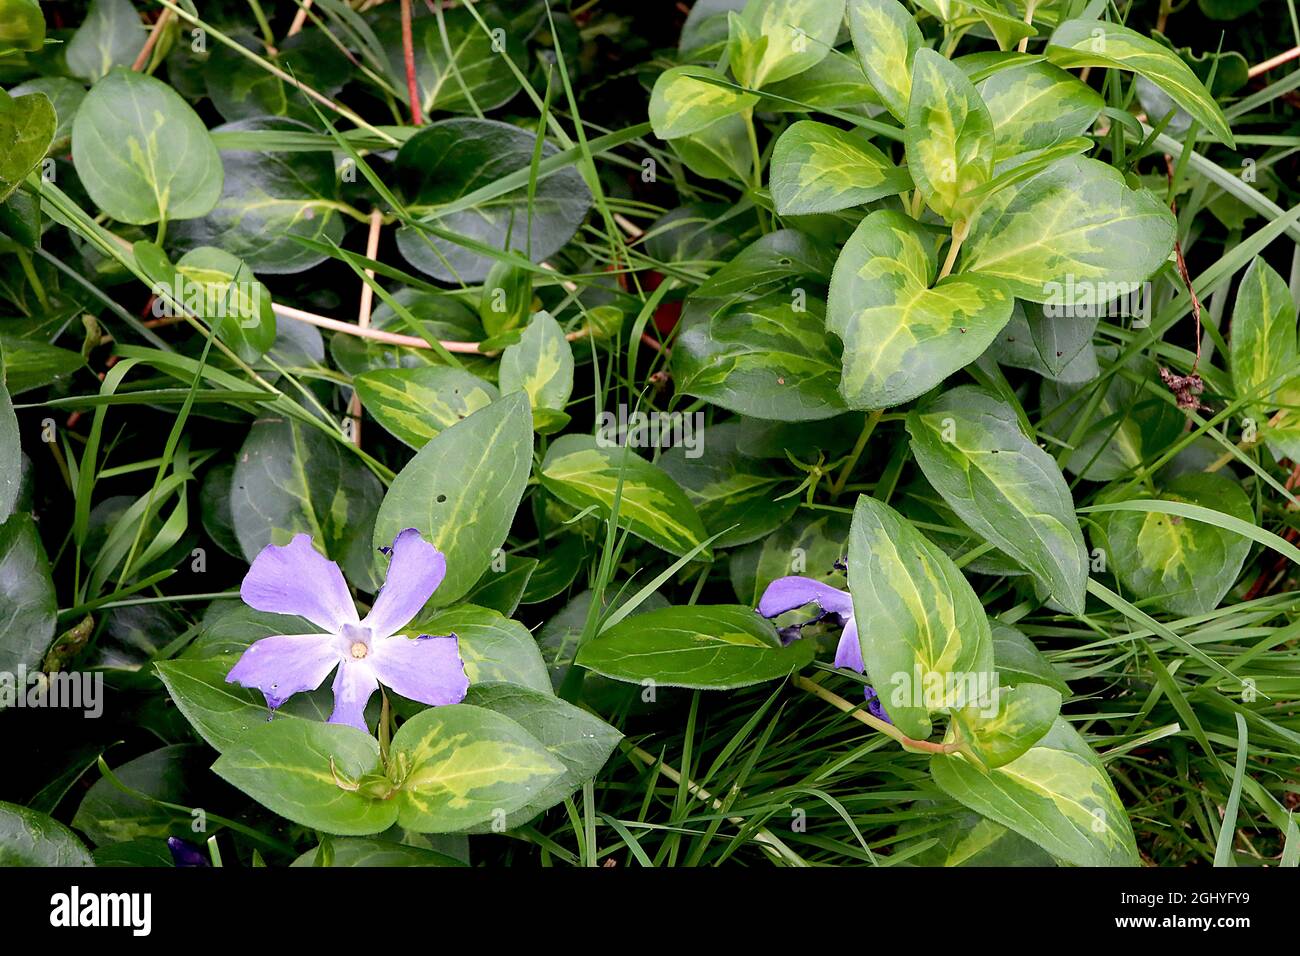 Vinca major ‘Maculata’ greater periwinkle Surrey Marble – violet blue flowers and dark green leaves with lime green splash,  August, England, UK Stock Photo